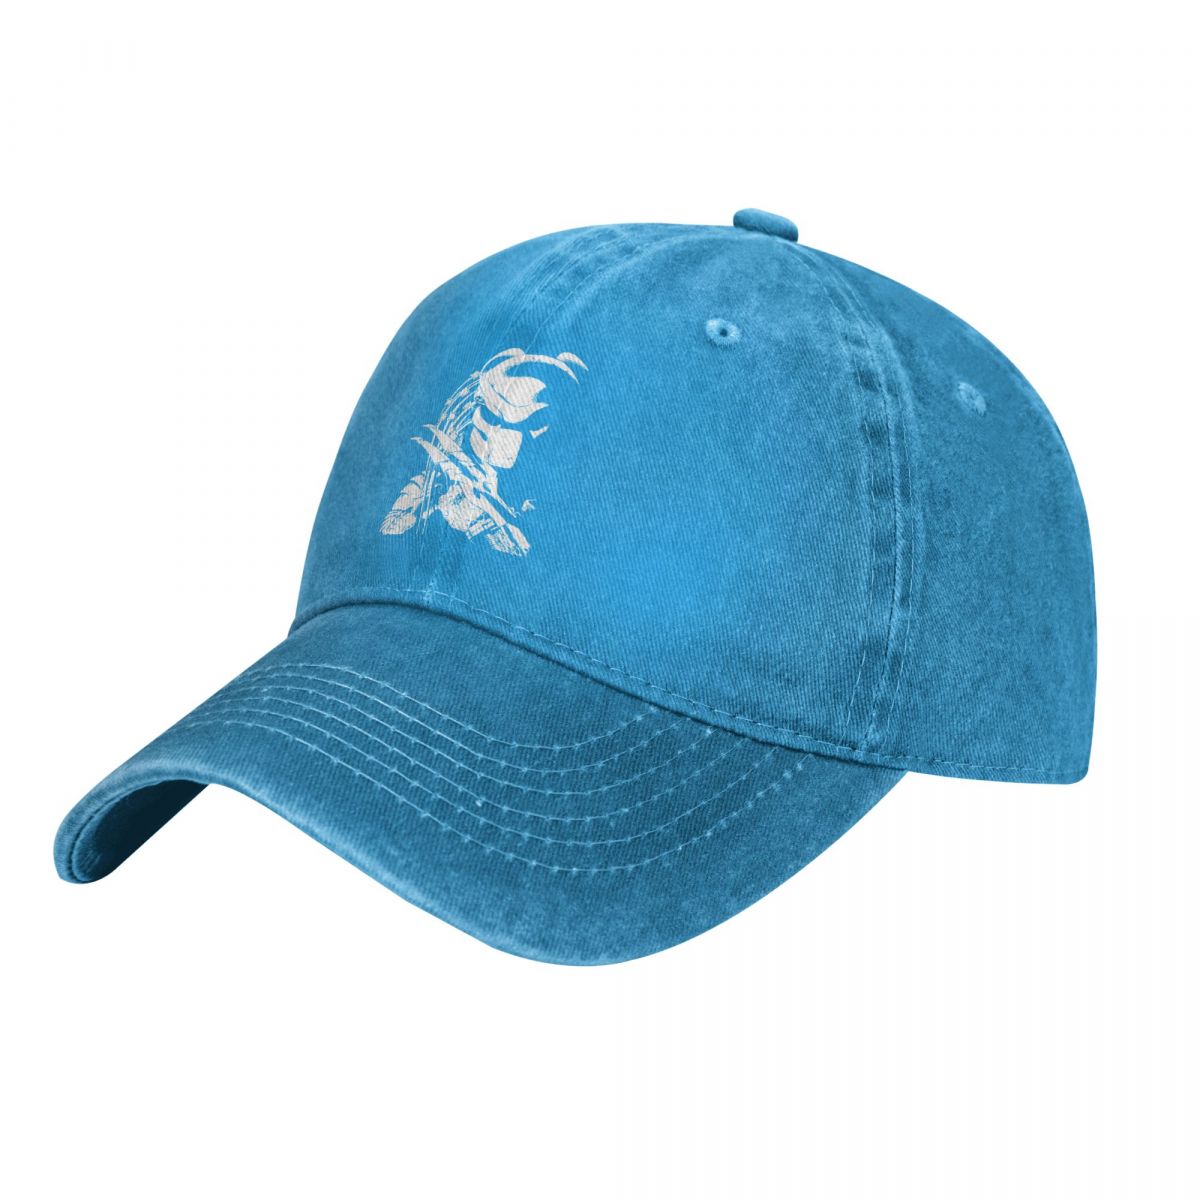 Predator - You Know It's Going Down - Snapback Baseball Cap - Summer Hat For Men and Women-Blue-One Size-